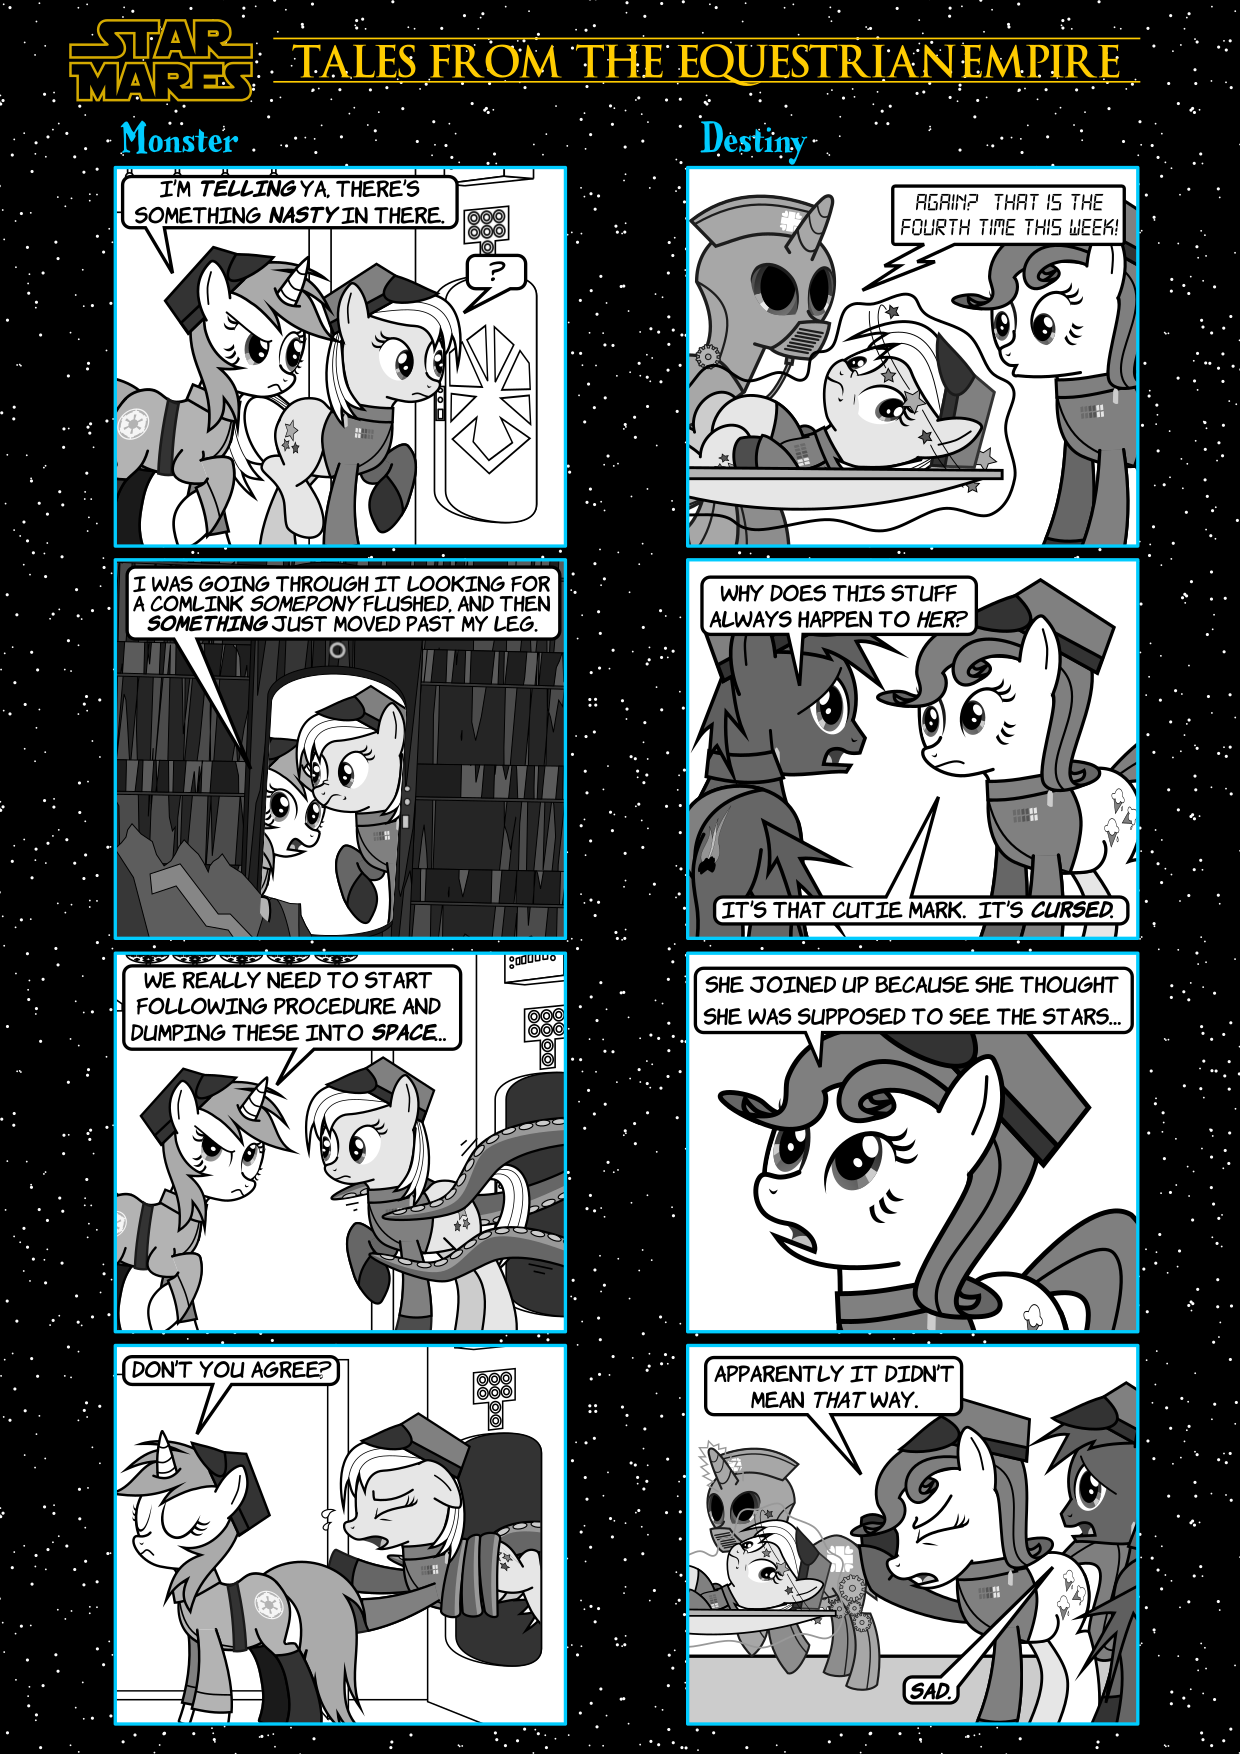 Star Mares: Tales from the Equestrian Empire #2